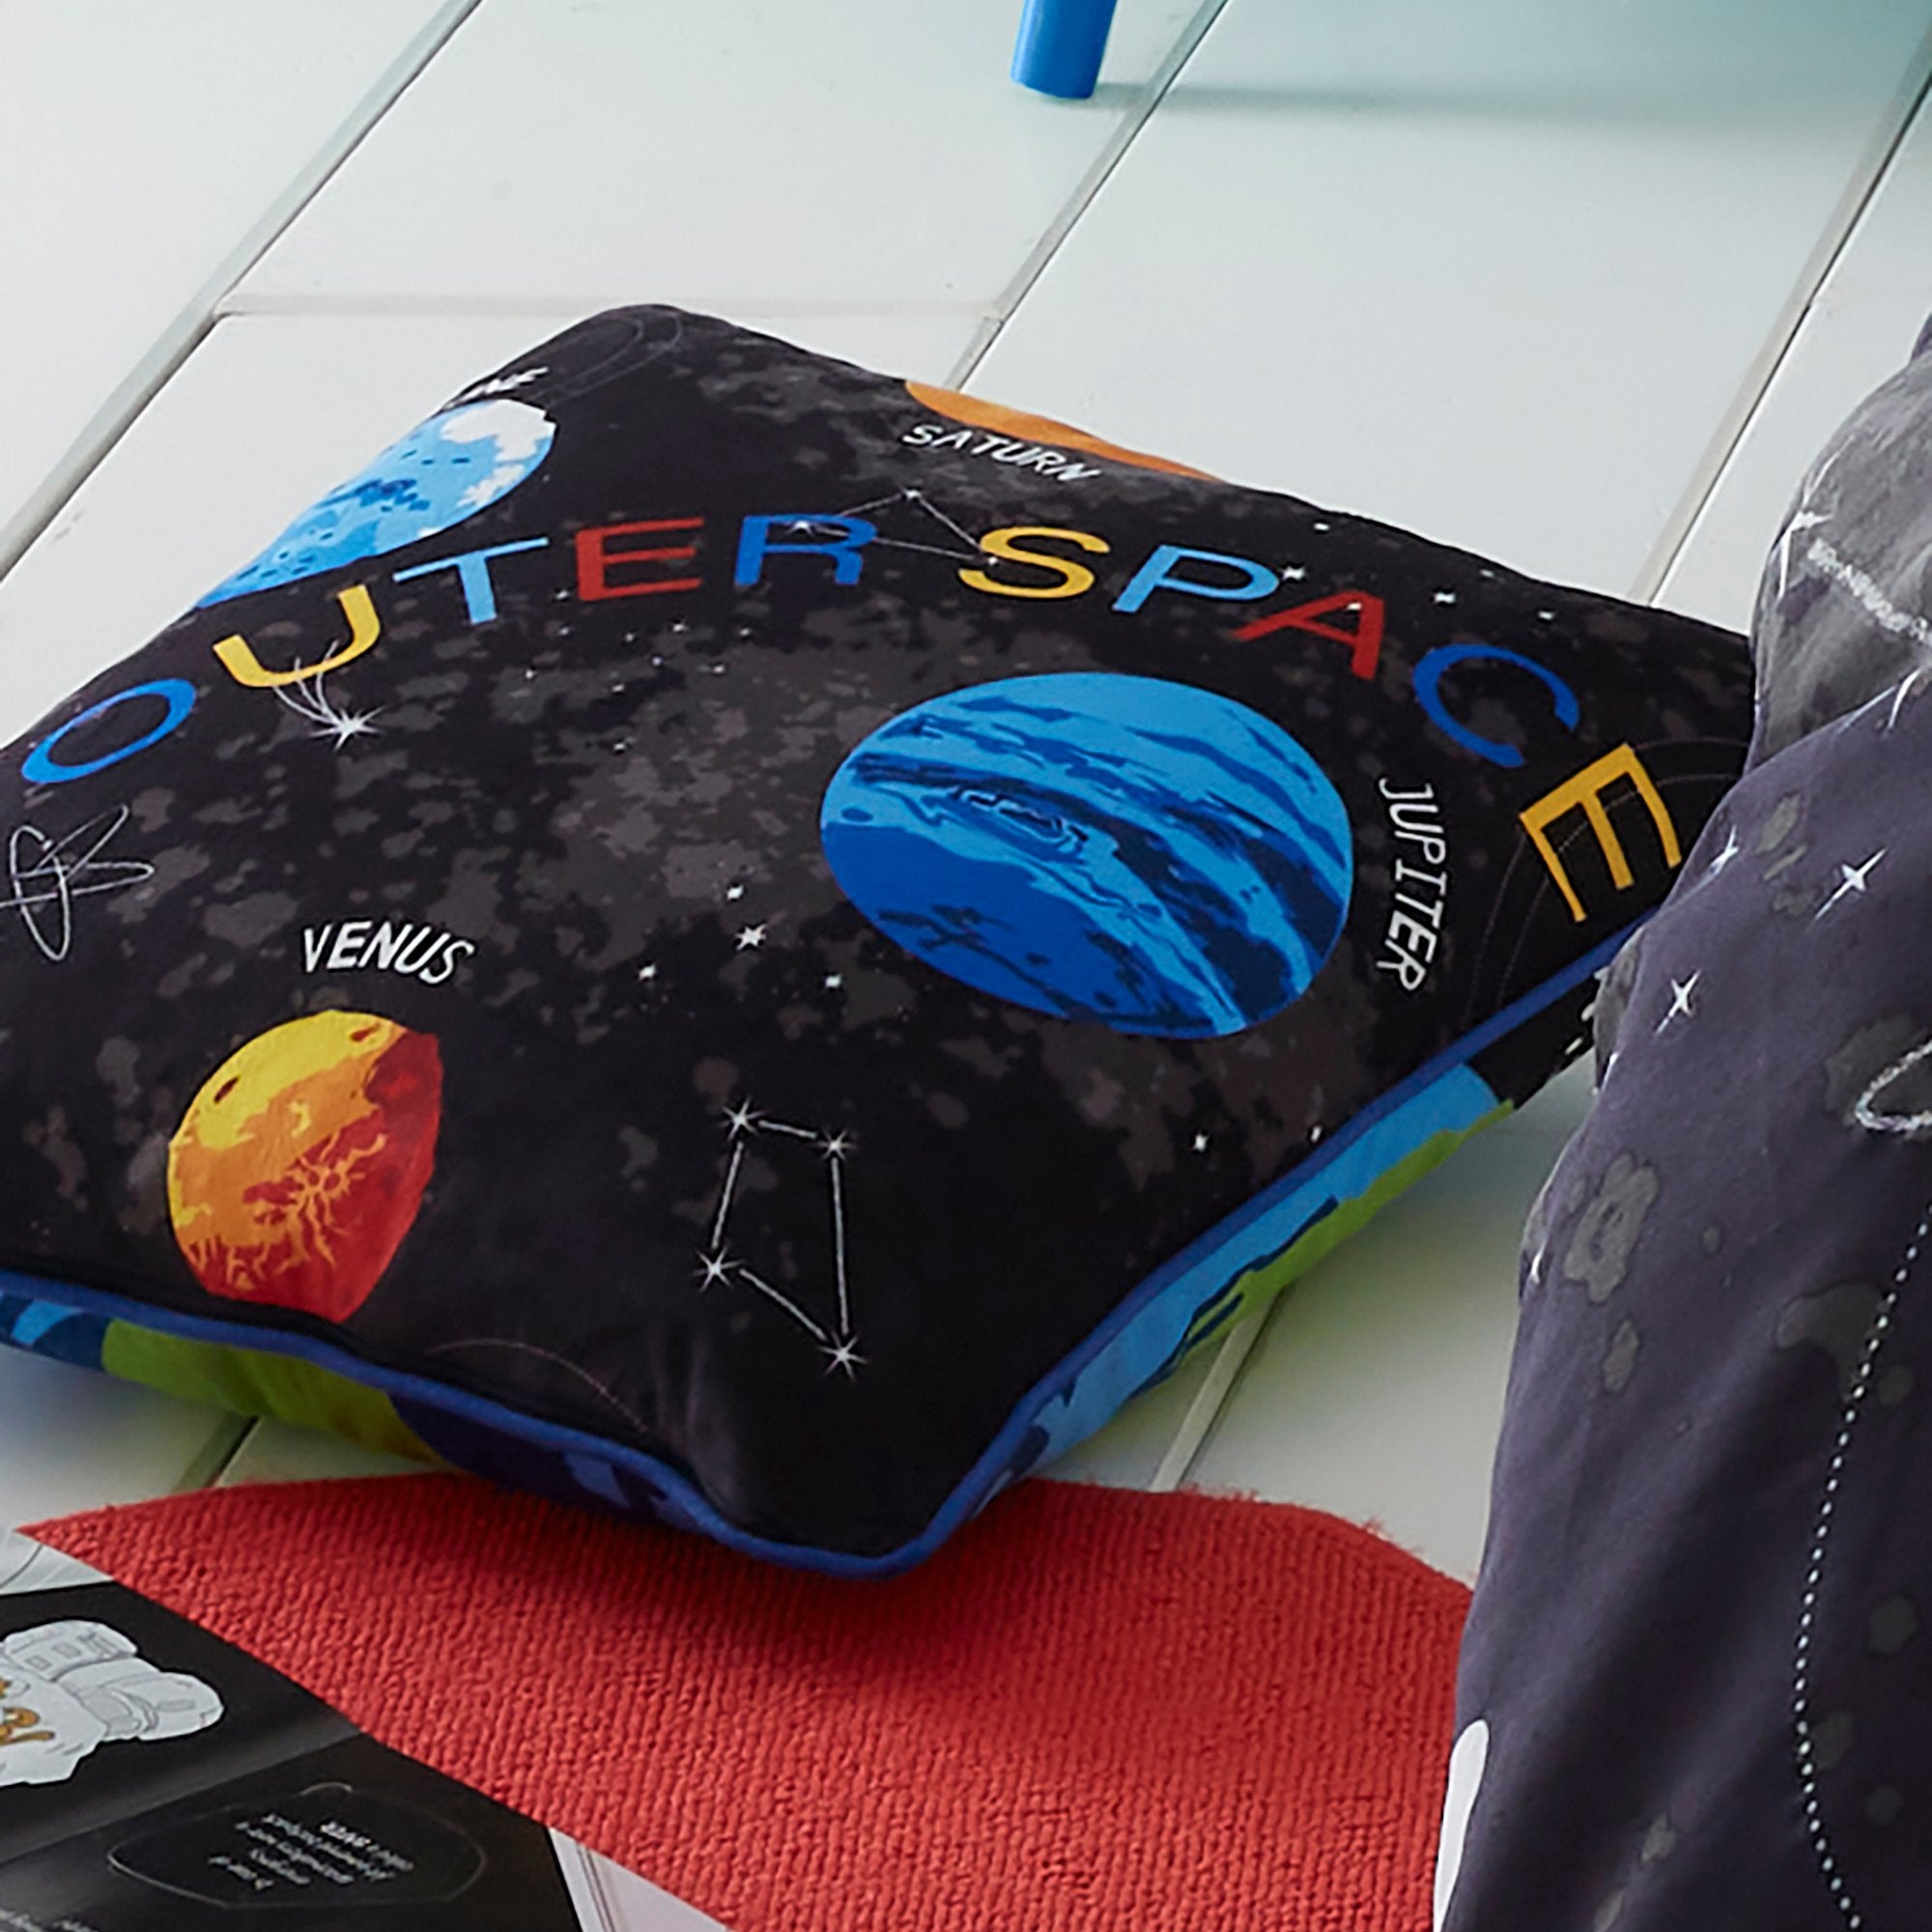 Cushion Outer Space by Bedlam in Black